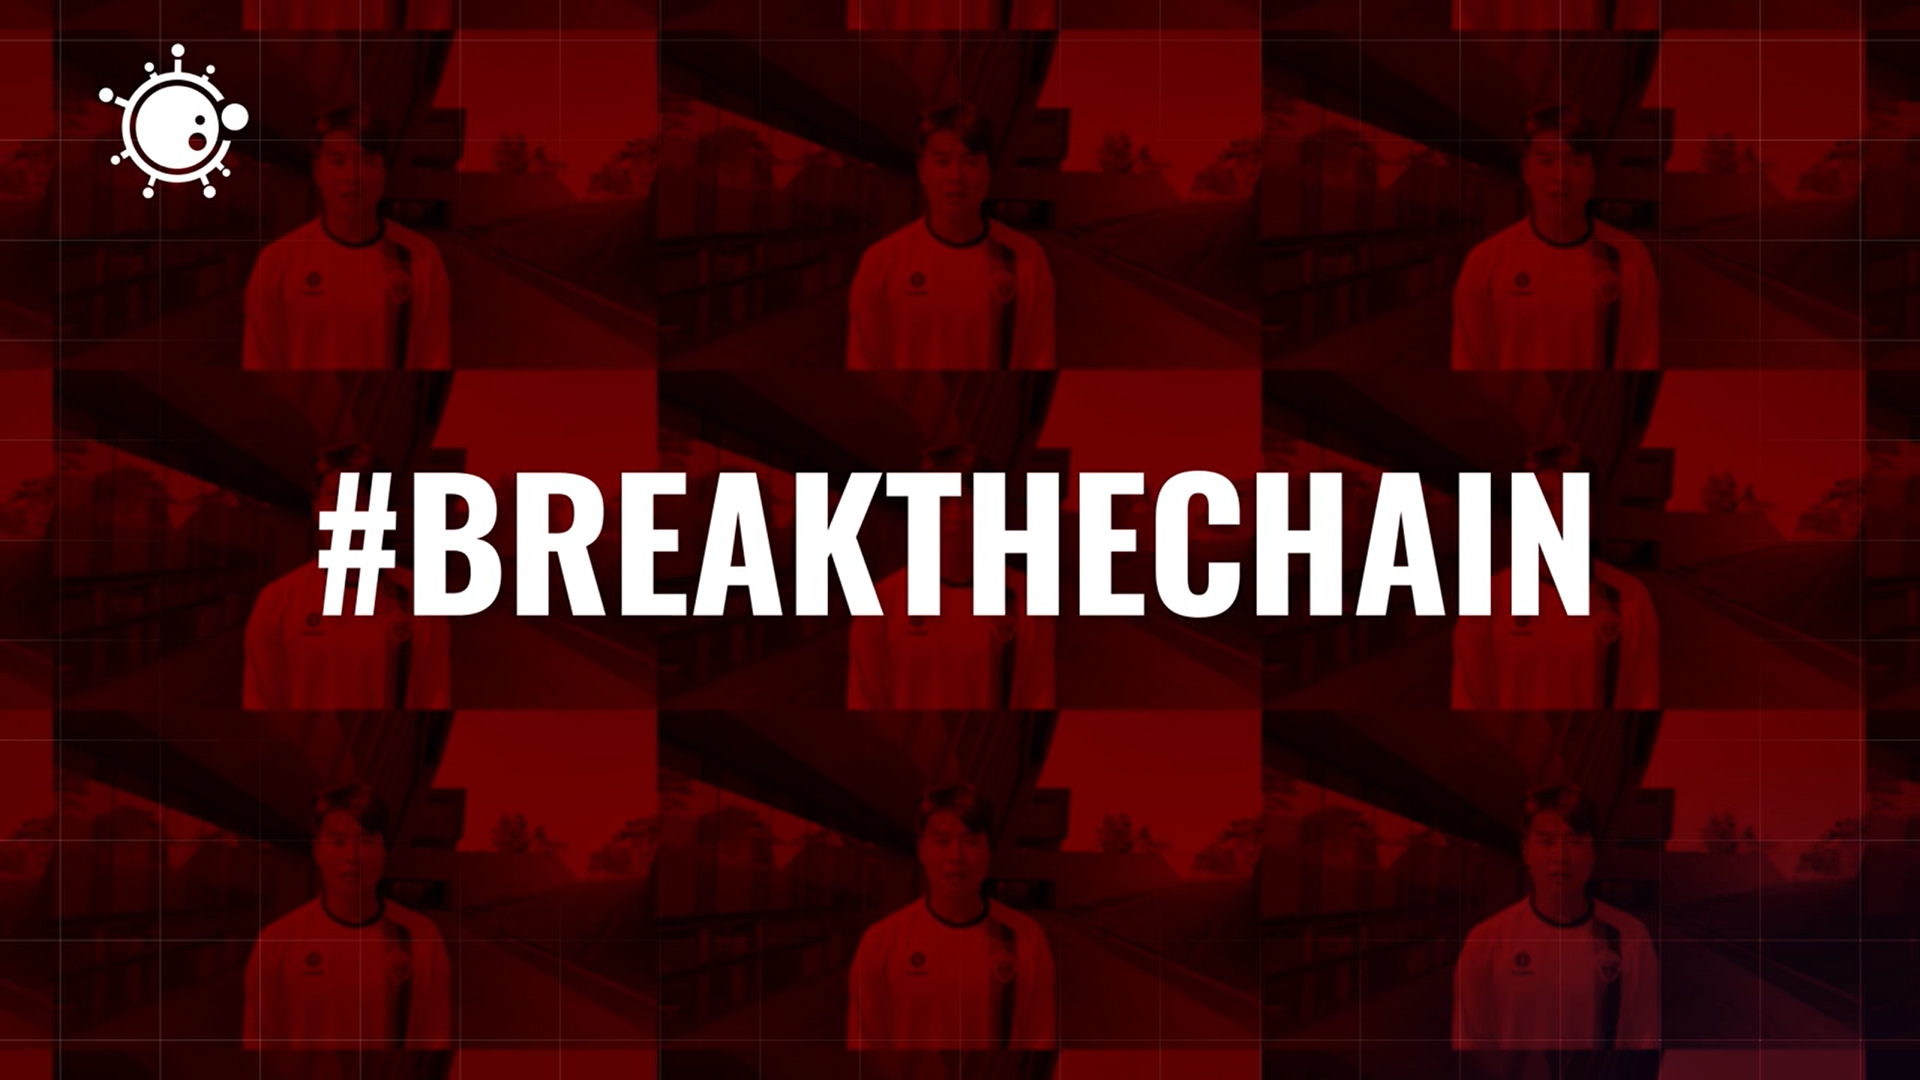 The AFC have launched a campaign titled Break The Chain ©AFC